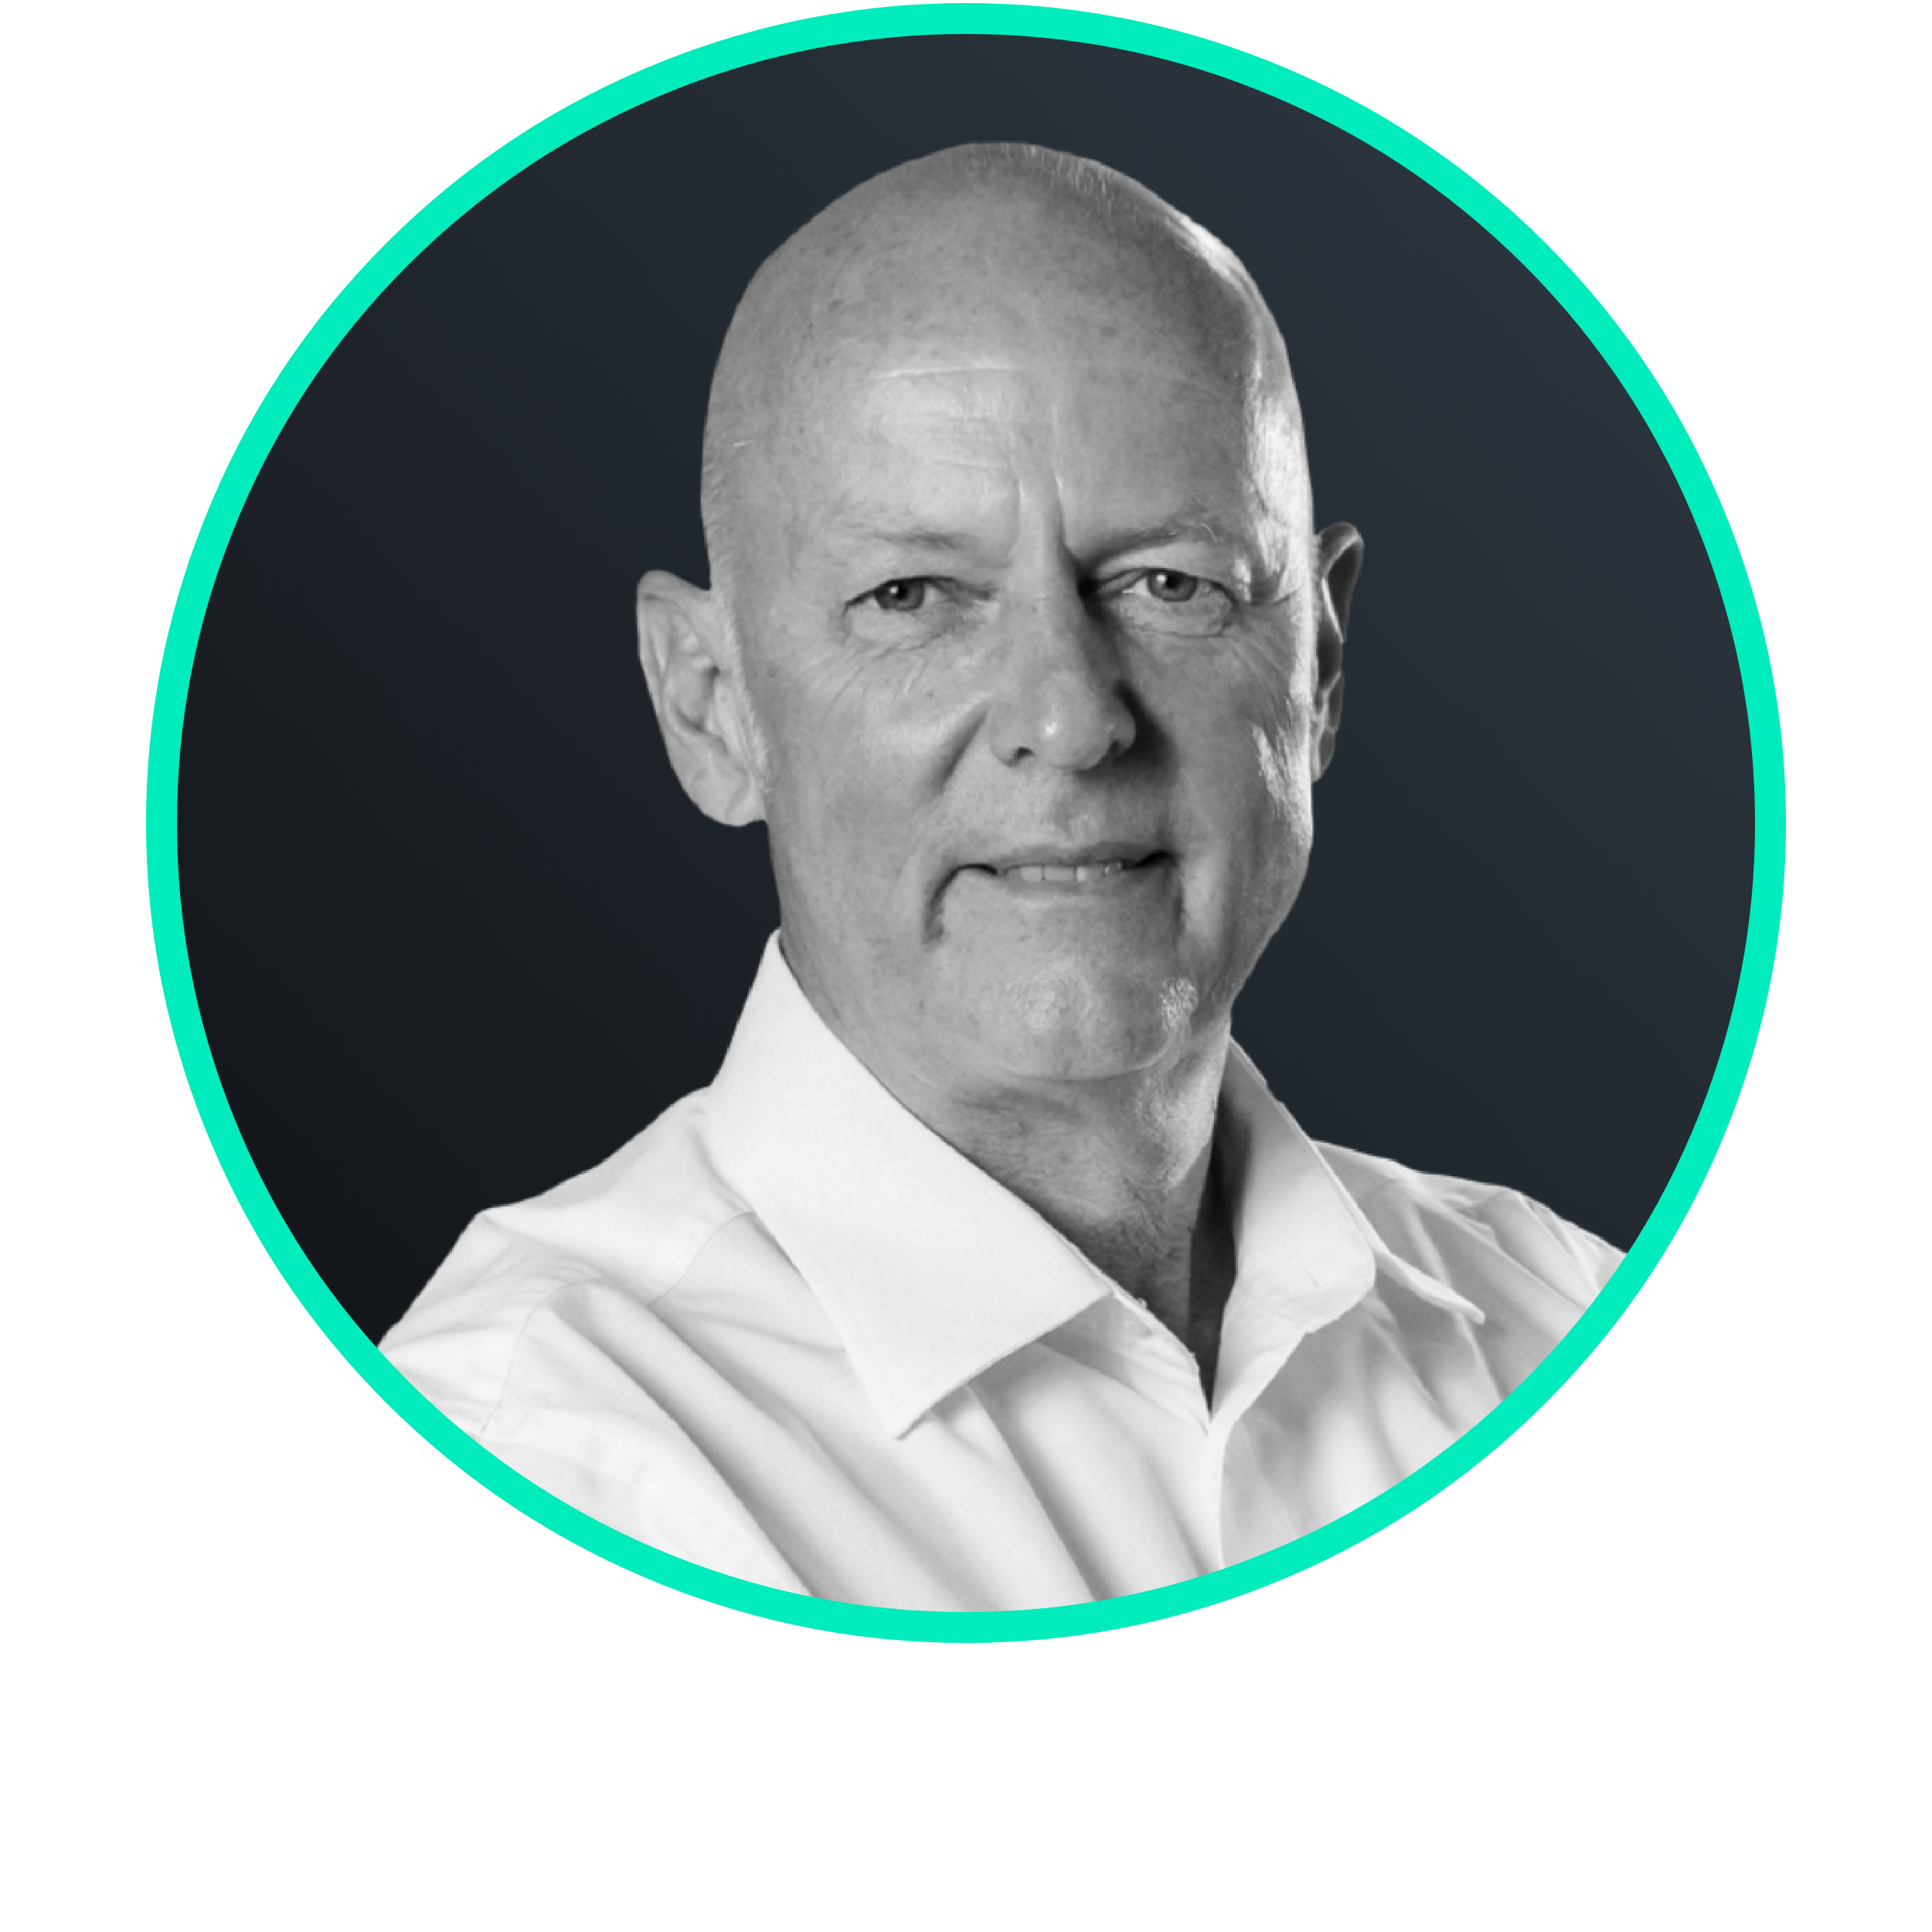 Frank Brauchle General Manager South bei d.velop